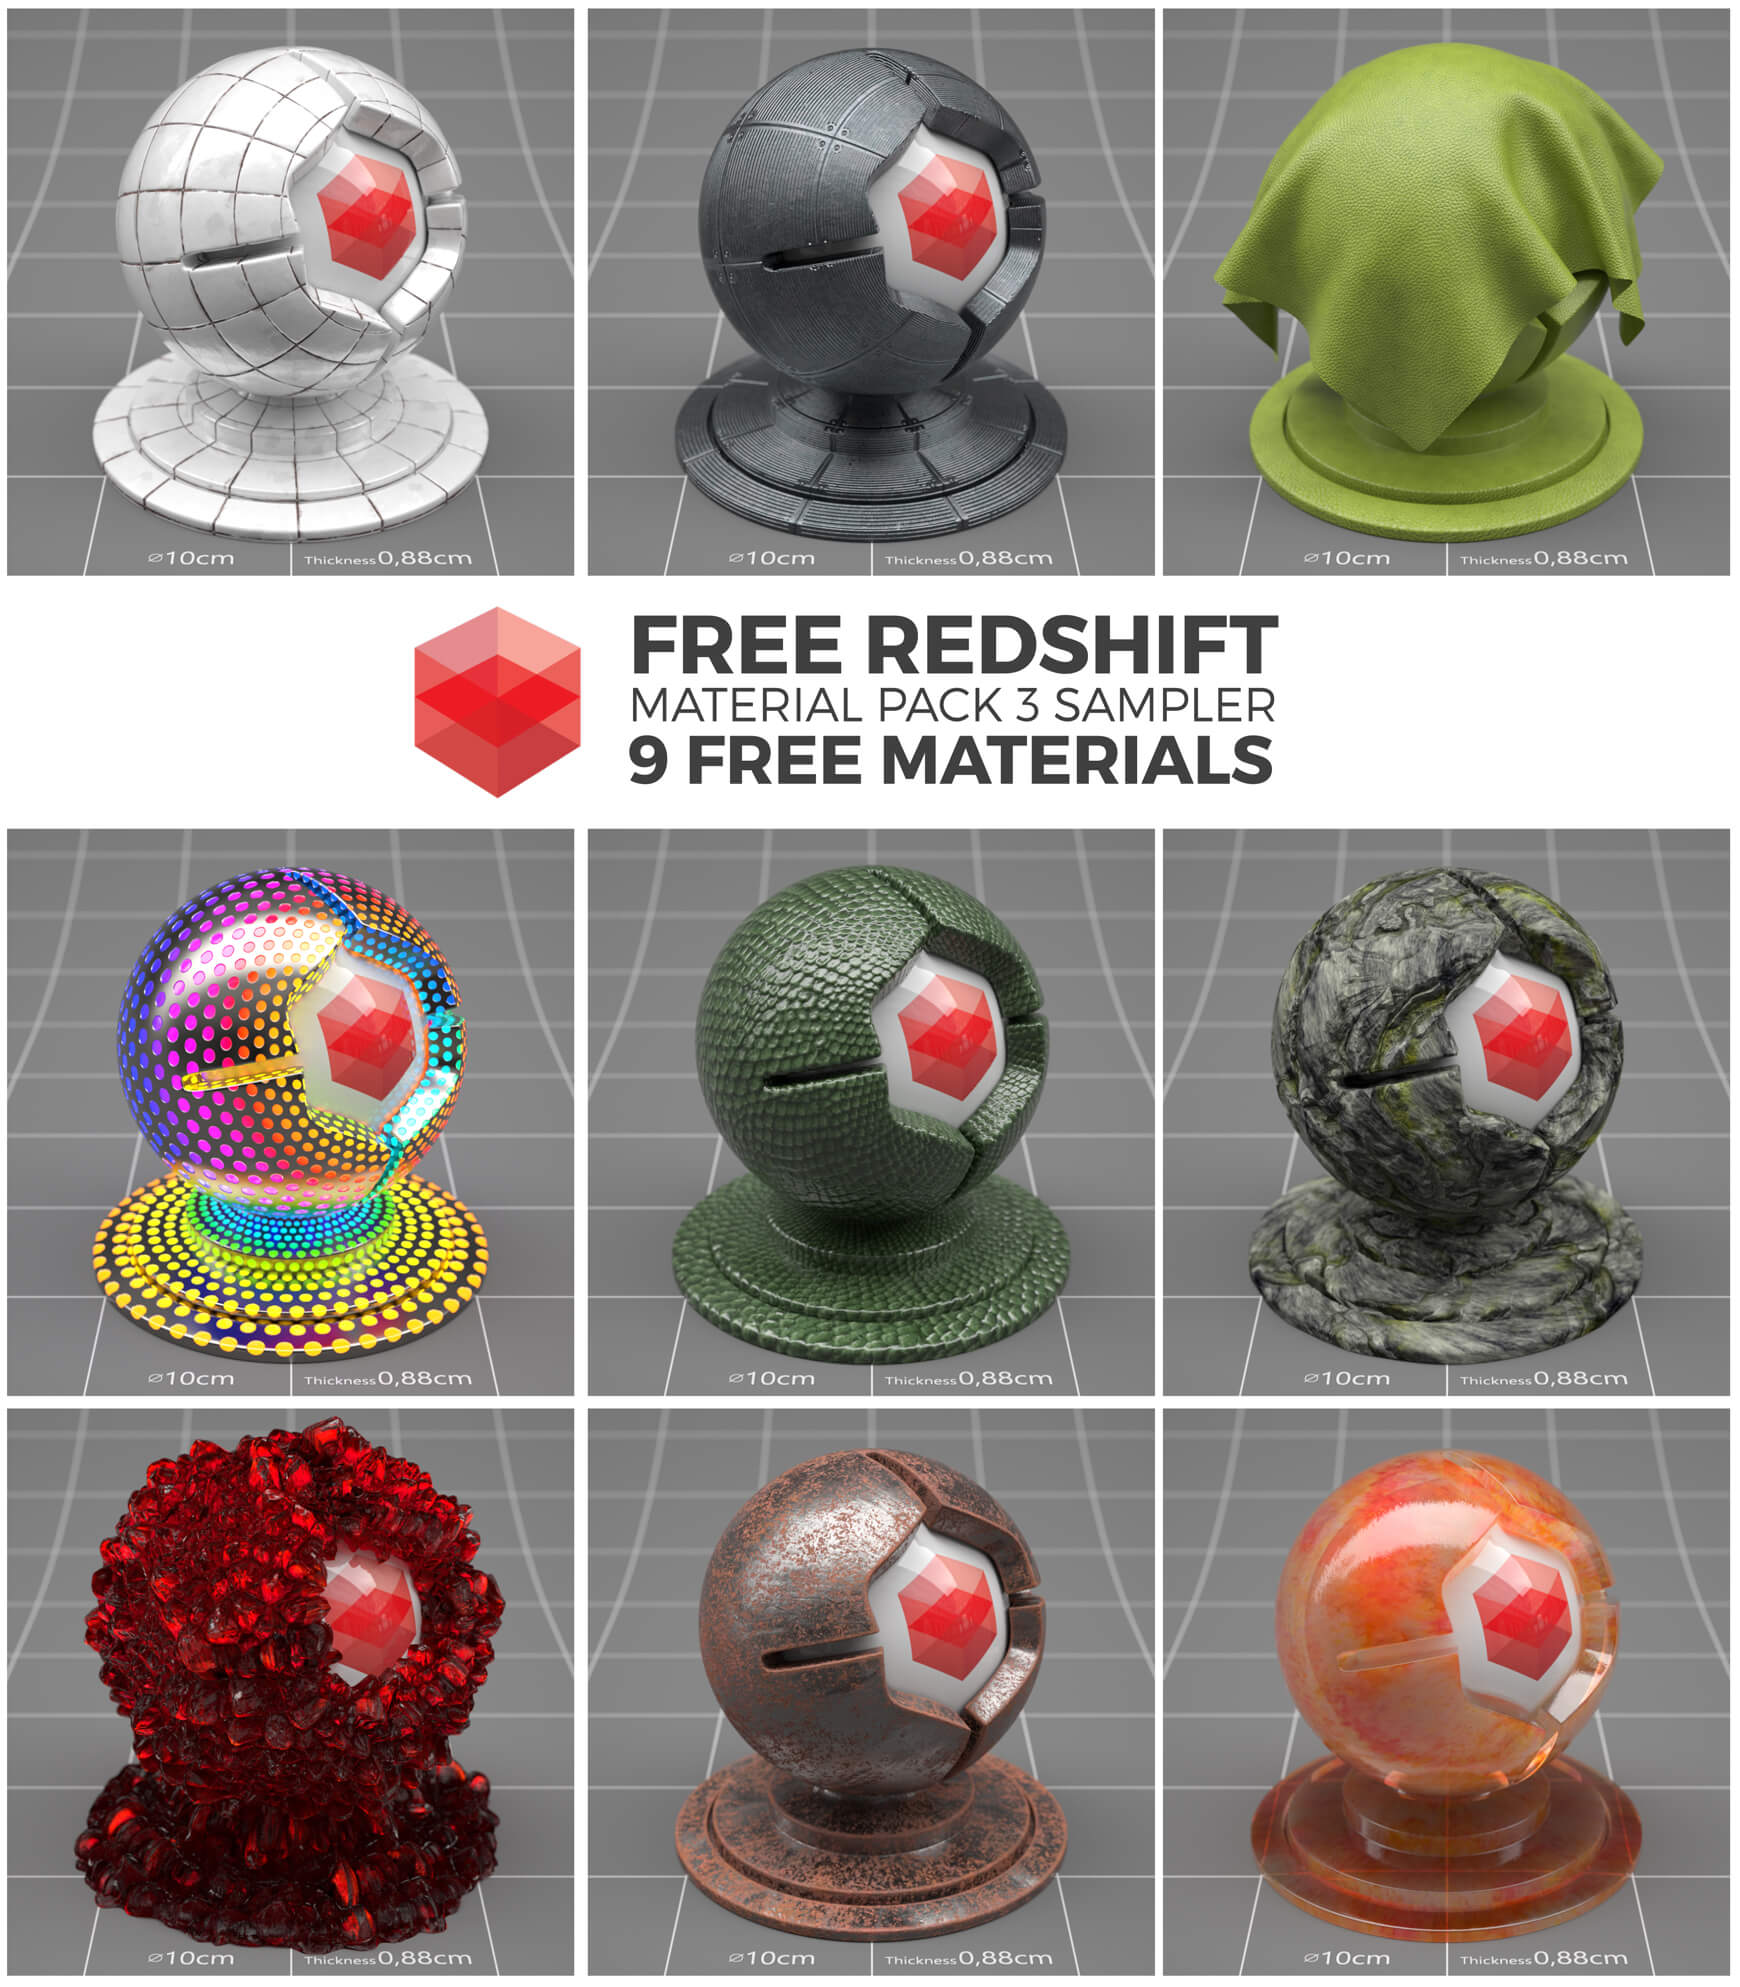 redshift c4d material pack